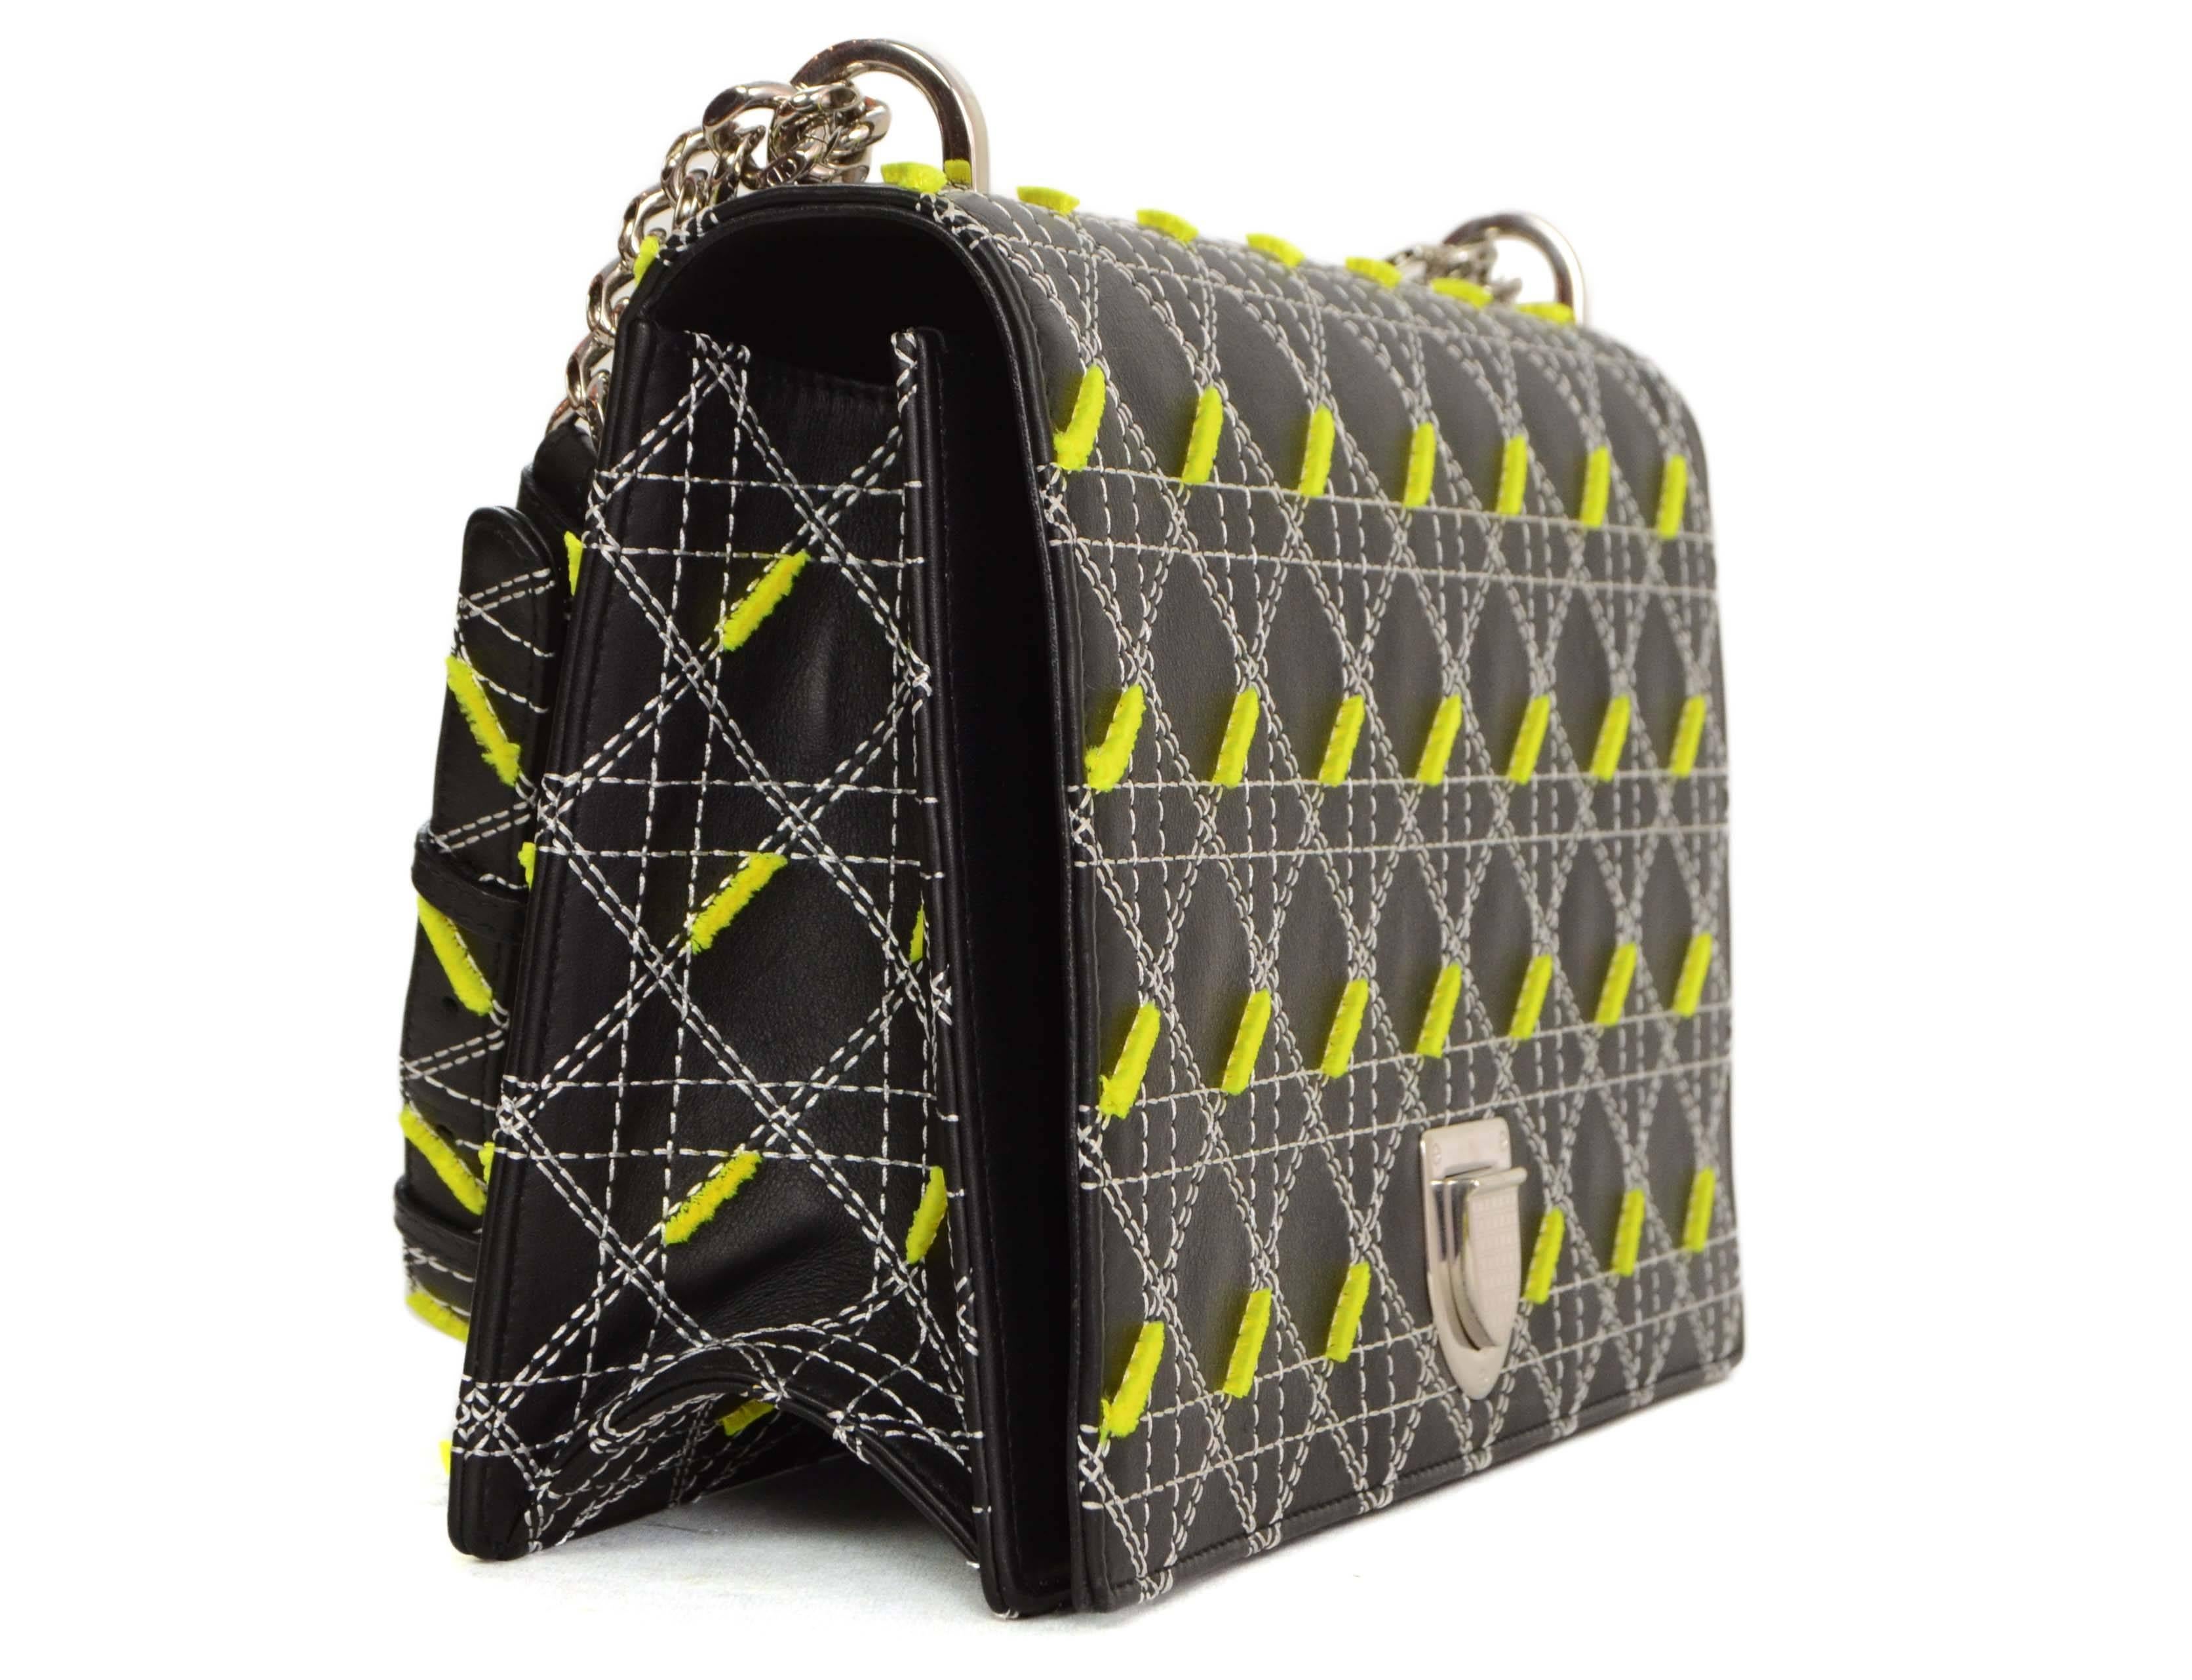 Christian Dior Black Quilted Diorama Large Flap Bag 
Features neon accents and white contrast stitching throughout
Made In: Italy
Color: Black, white and neon green
Hardware: Silvertone
Materials: Leather, metal and polyester blend
Lining: